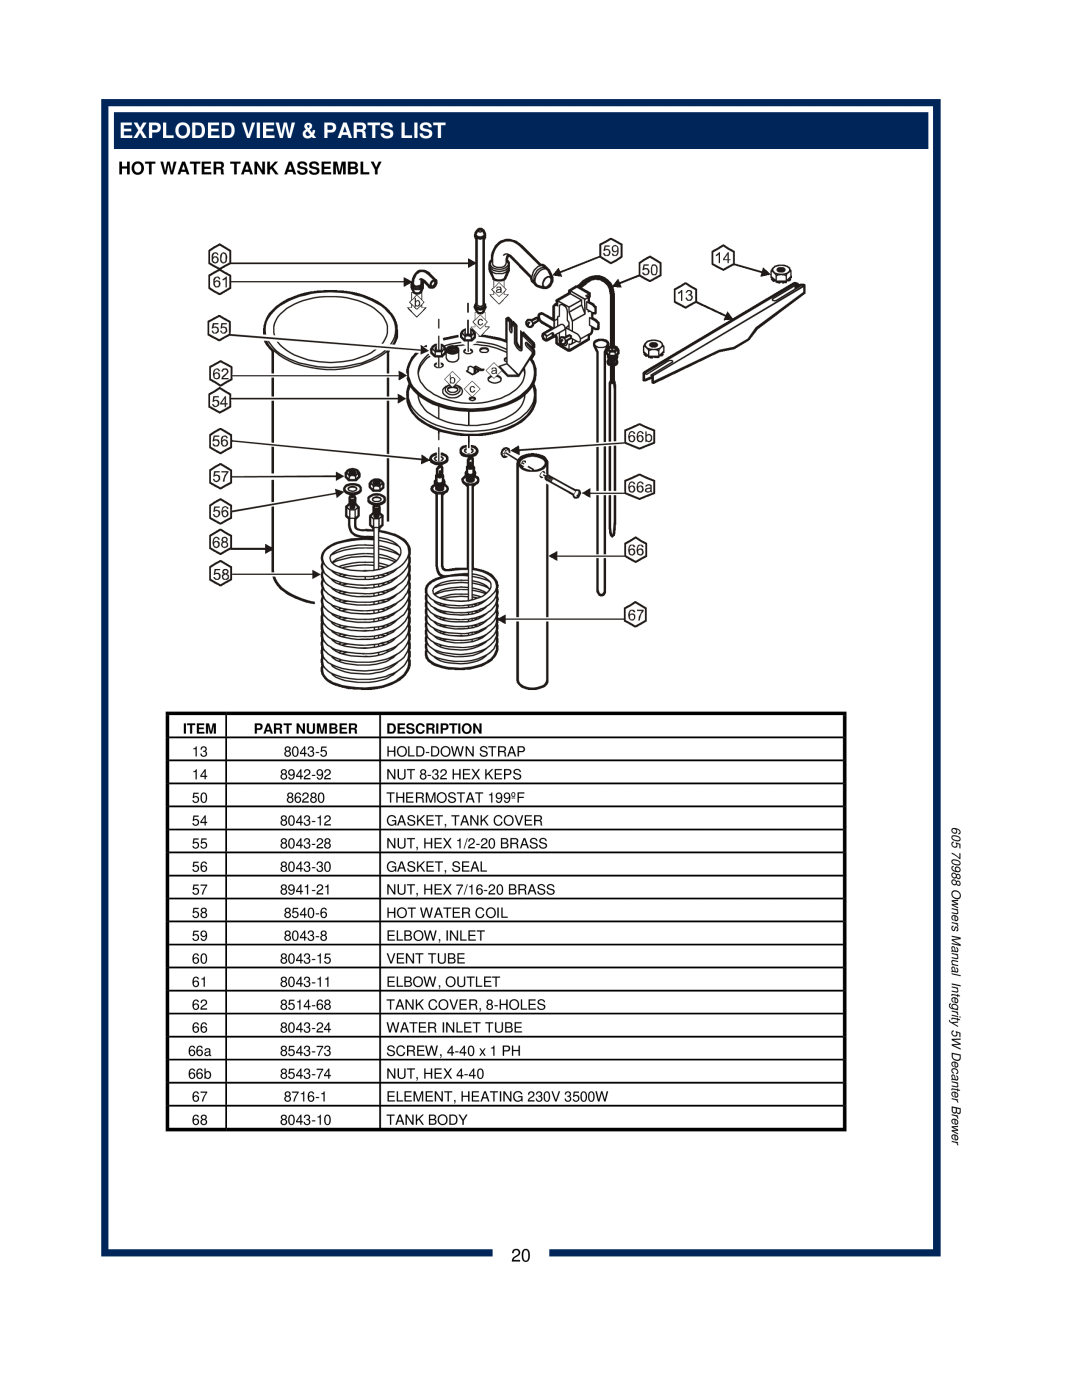 Bloomfield 8752 owner manual Hot Water Tank Assembly, Exploded View & Parts List, Part Number, Description 